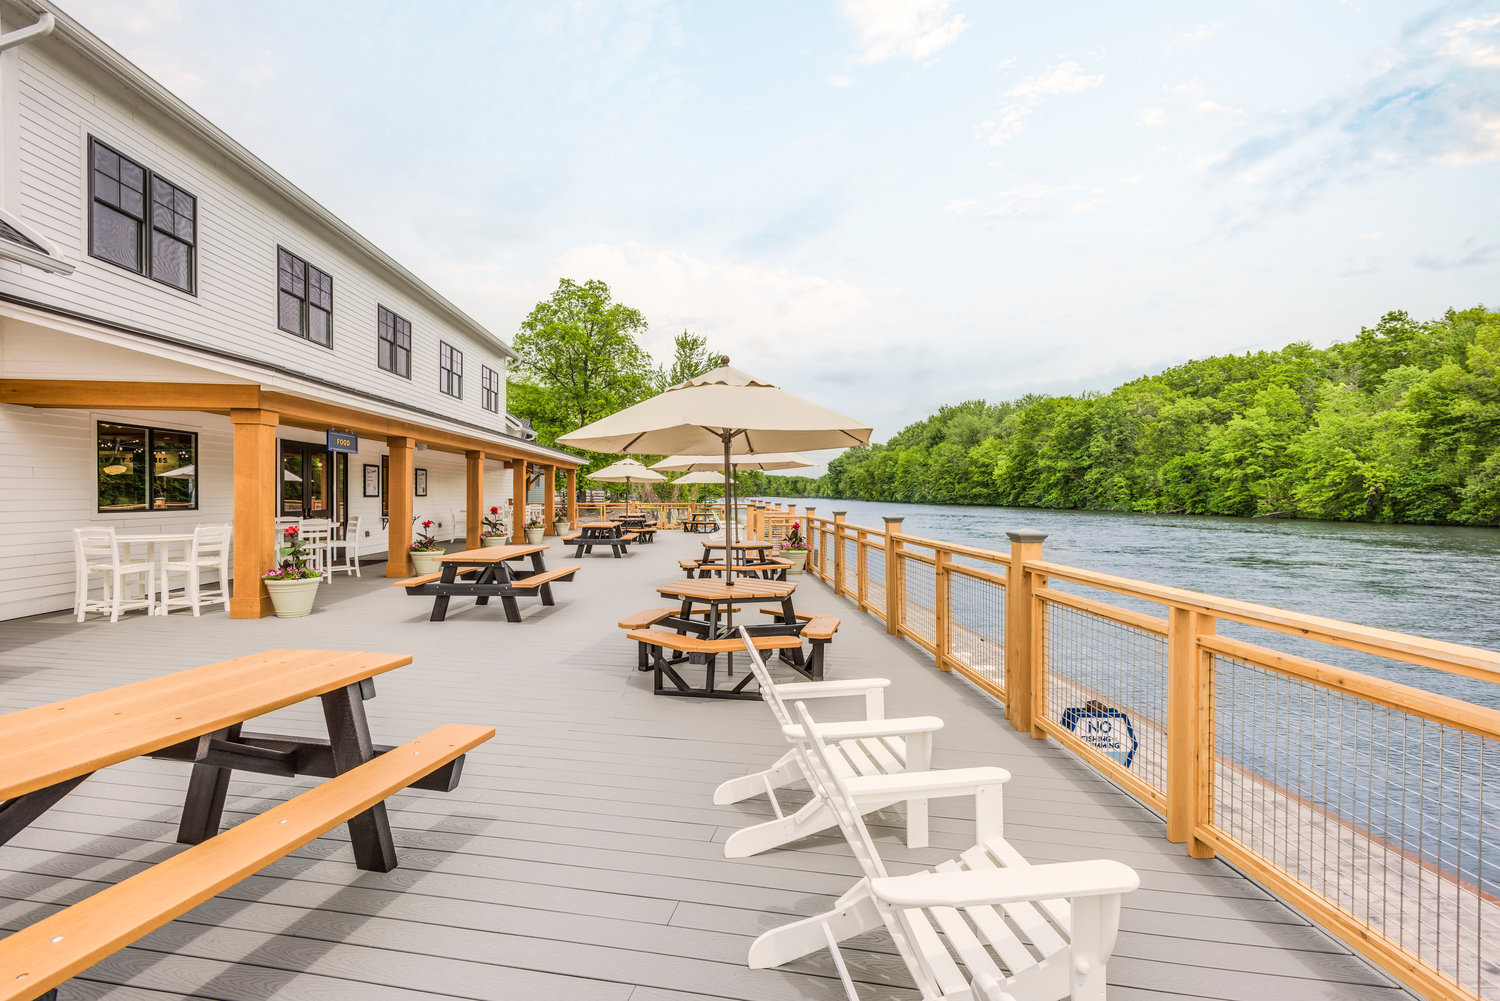 The Cove features 70 contemporary and appointed two- and three-bedroom cottages, each with its own pontoon boat. Amenities also include in-unit washer and dryer, an outdoor heated pool, gas grill for every cottage, fire pits, full-sized kitchen, a playground and more.